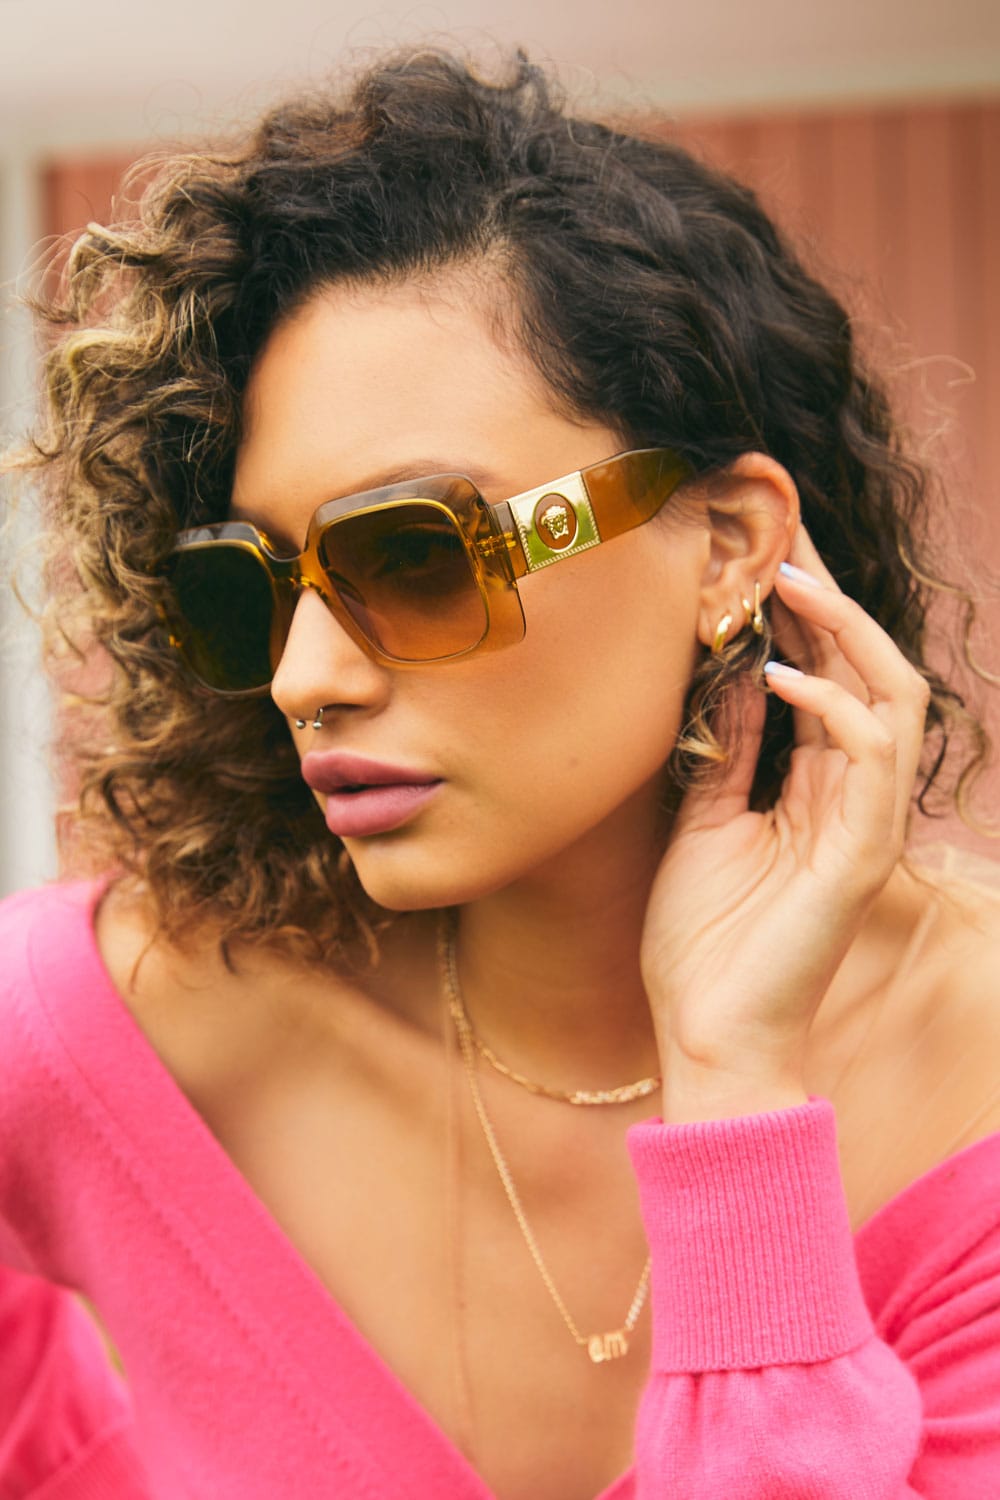 Find Your Perfect Sunglasses at Sunglass Hut